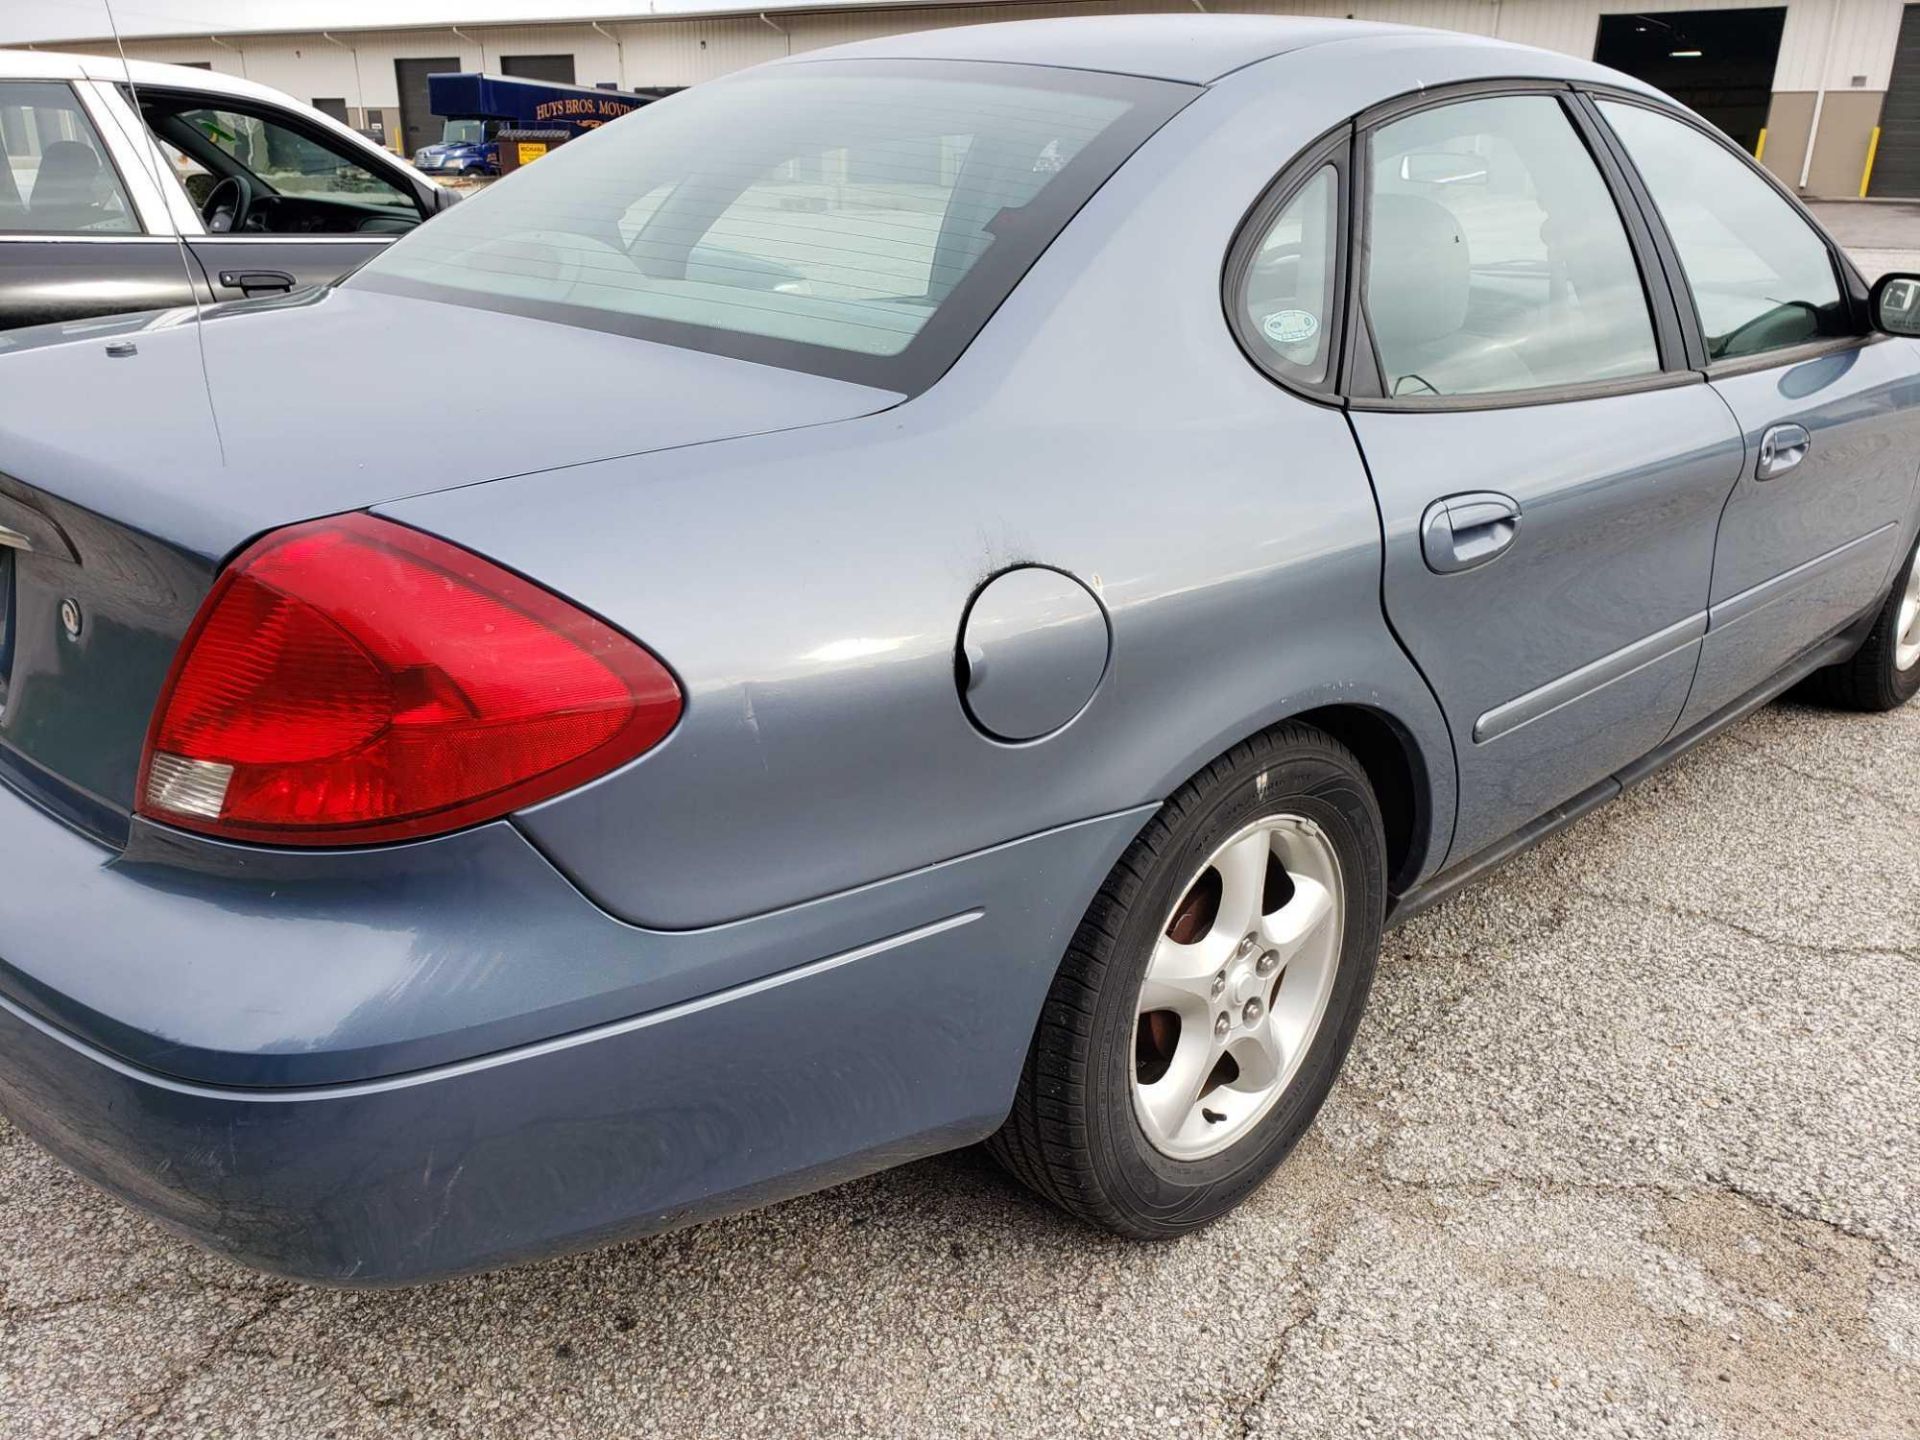 2001 Ford Taurus VIN 1FAFP53291G230229, 70,126 miles. Municipally owned and maintained. - Image 5 of 18